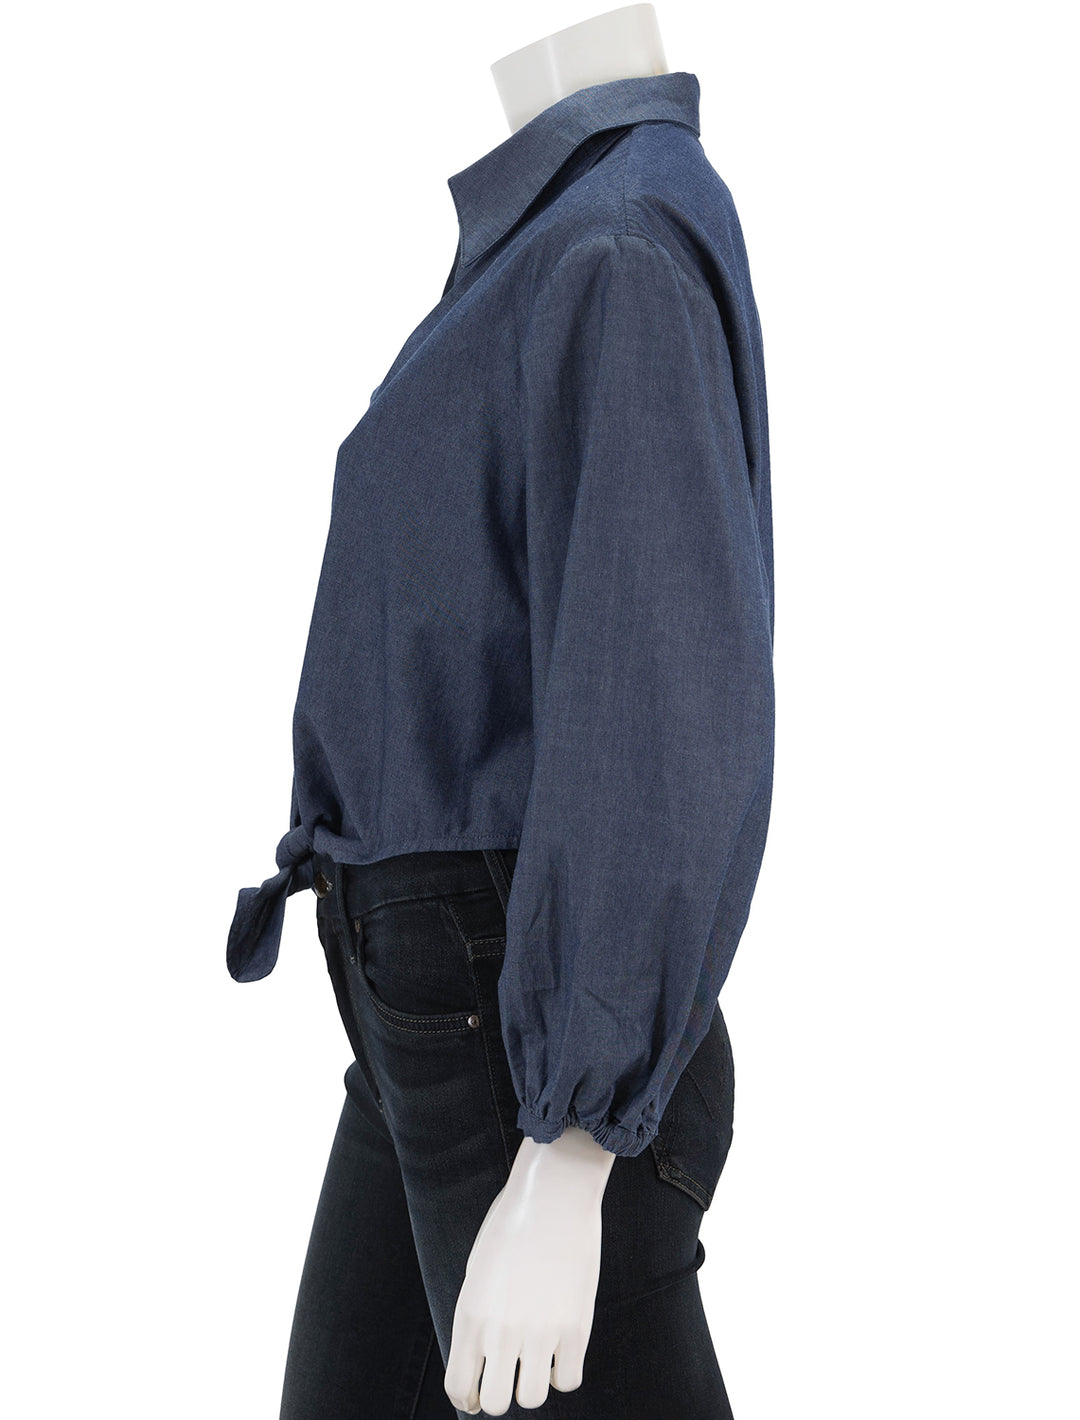 Side view of Cara Cara's rumson top in chambray.